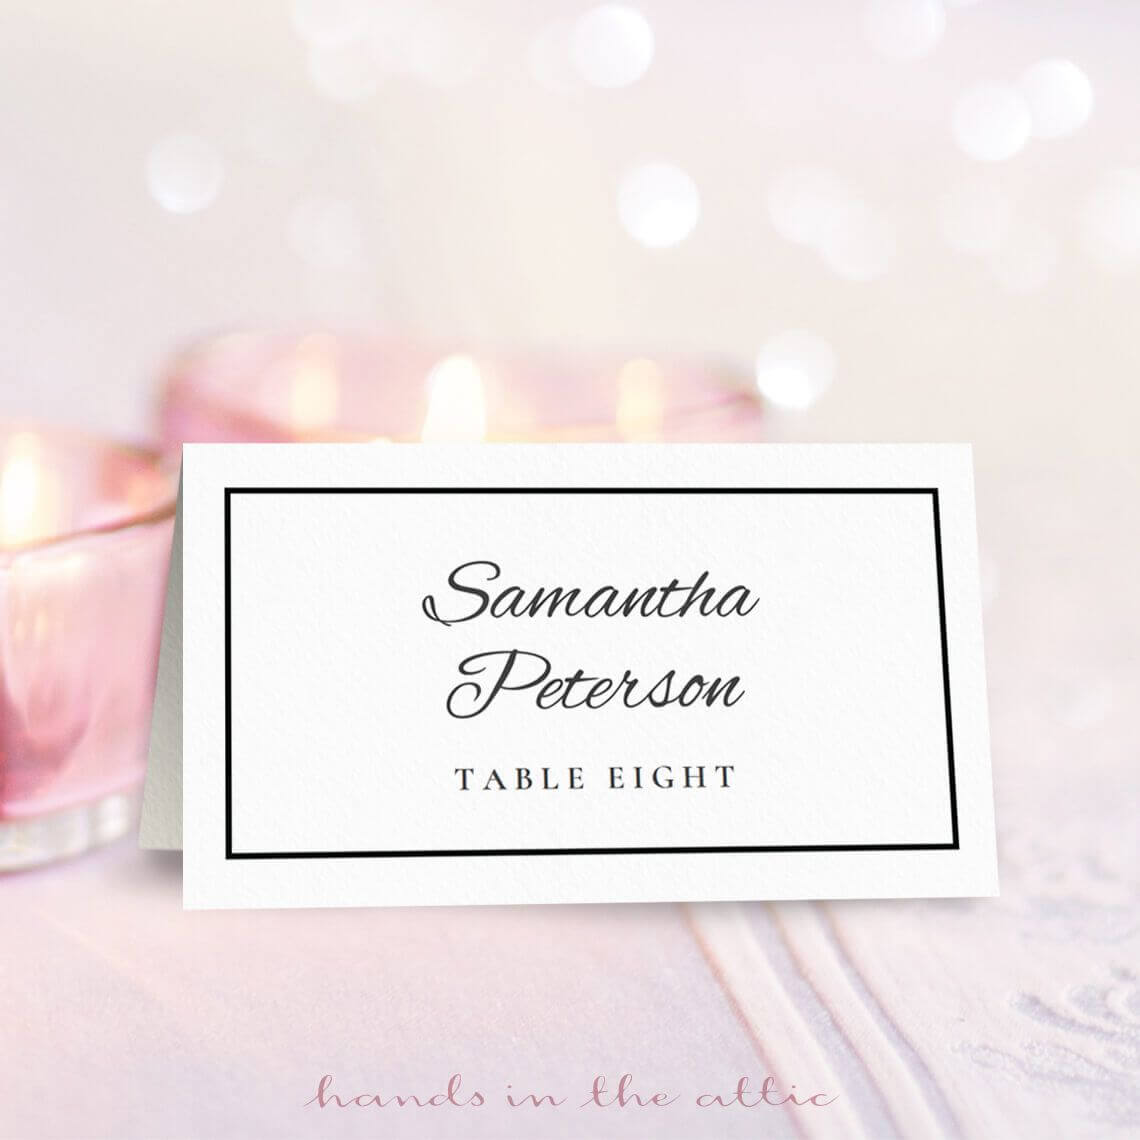 8-free-wedding-place-card-templates-for-place-card-template-free-6-per